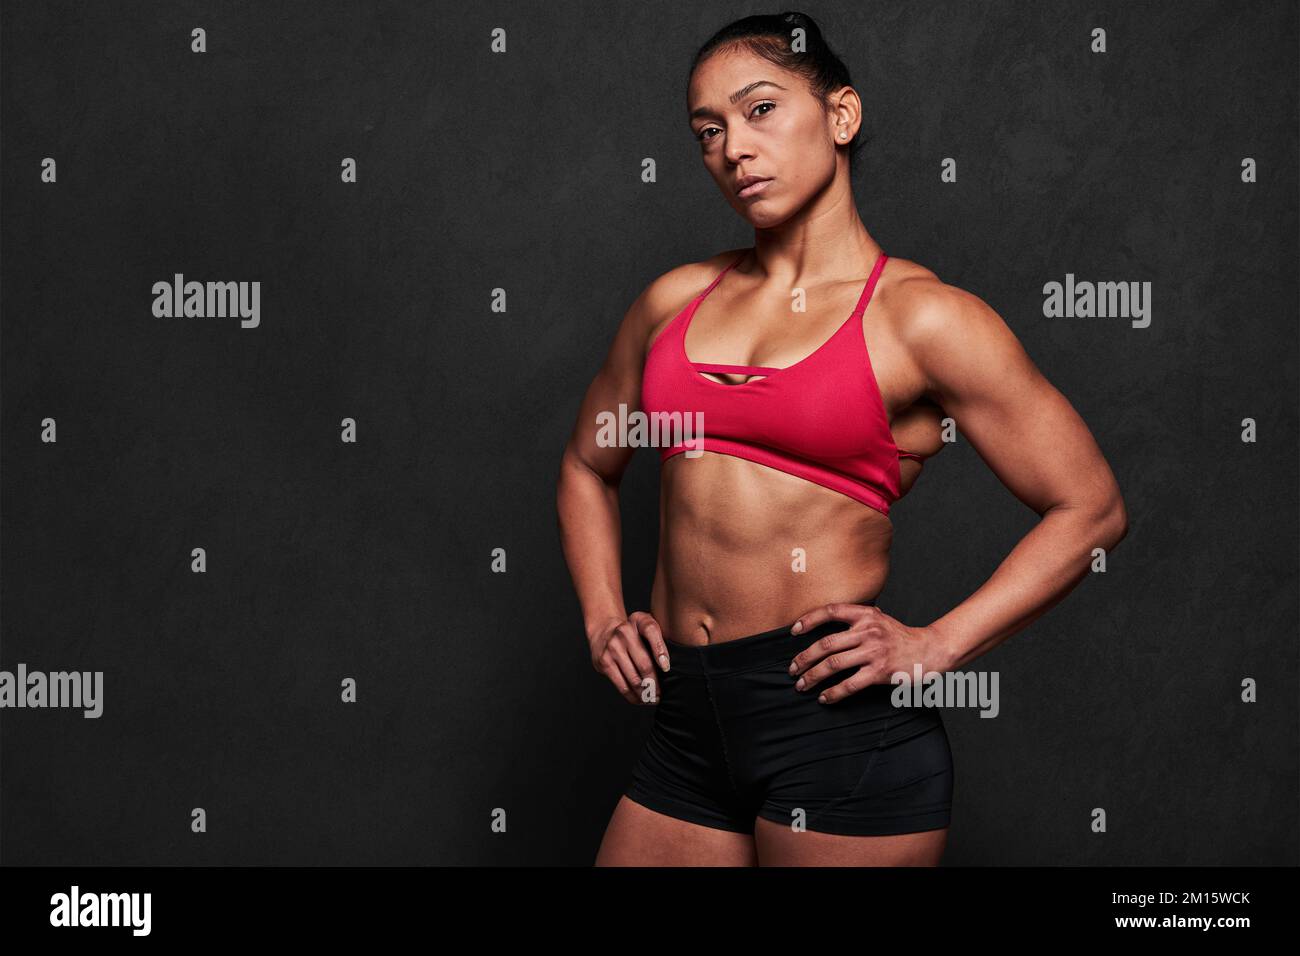 Woman Shorts and Red Sports Bra Stand Stock Photo - Image of